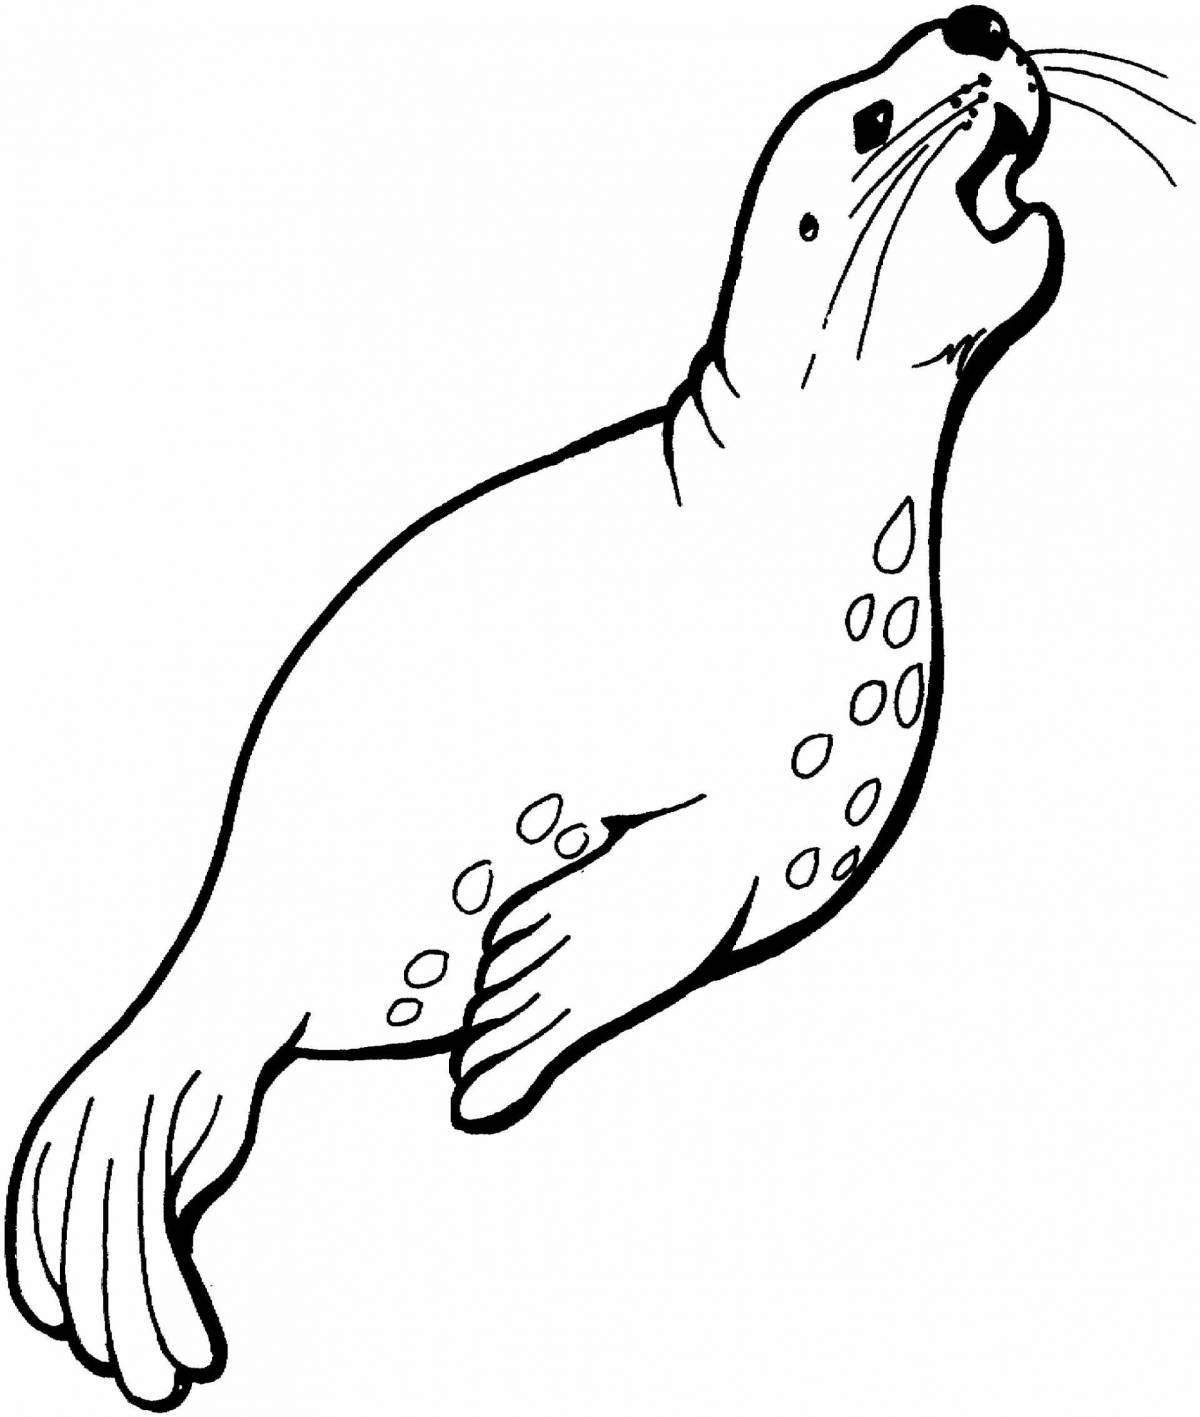 Great coloring of the Baikal seal